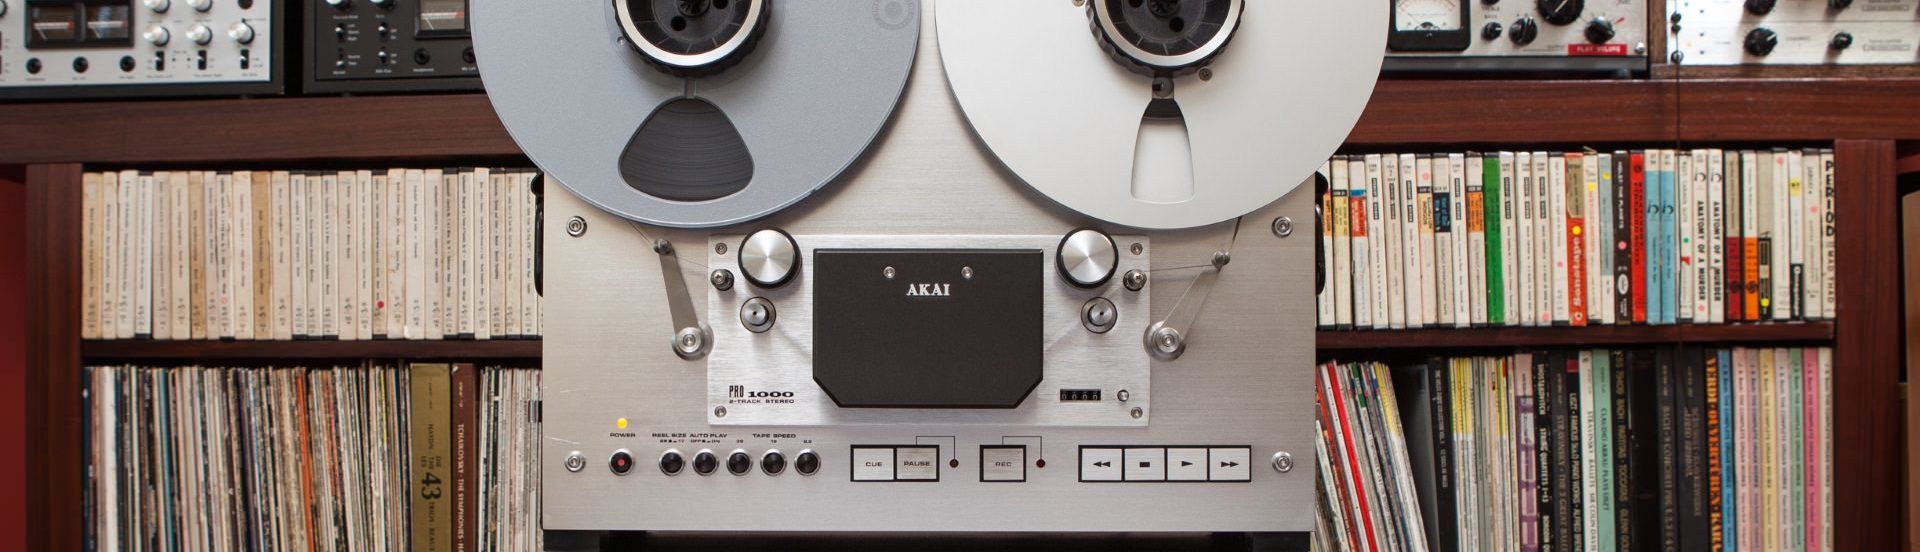 Reel to Reel Tape Recorders From Usa